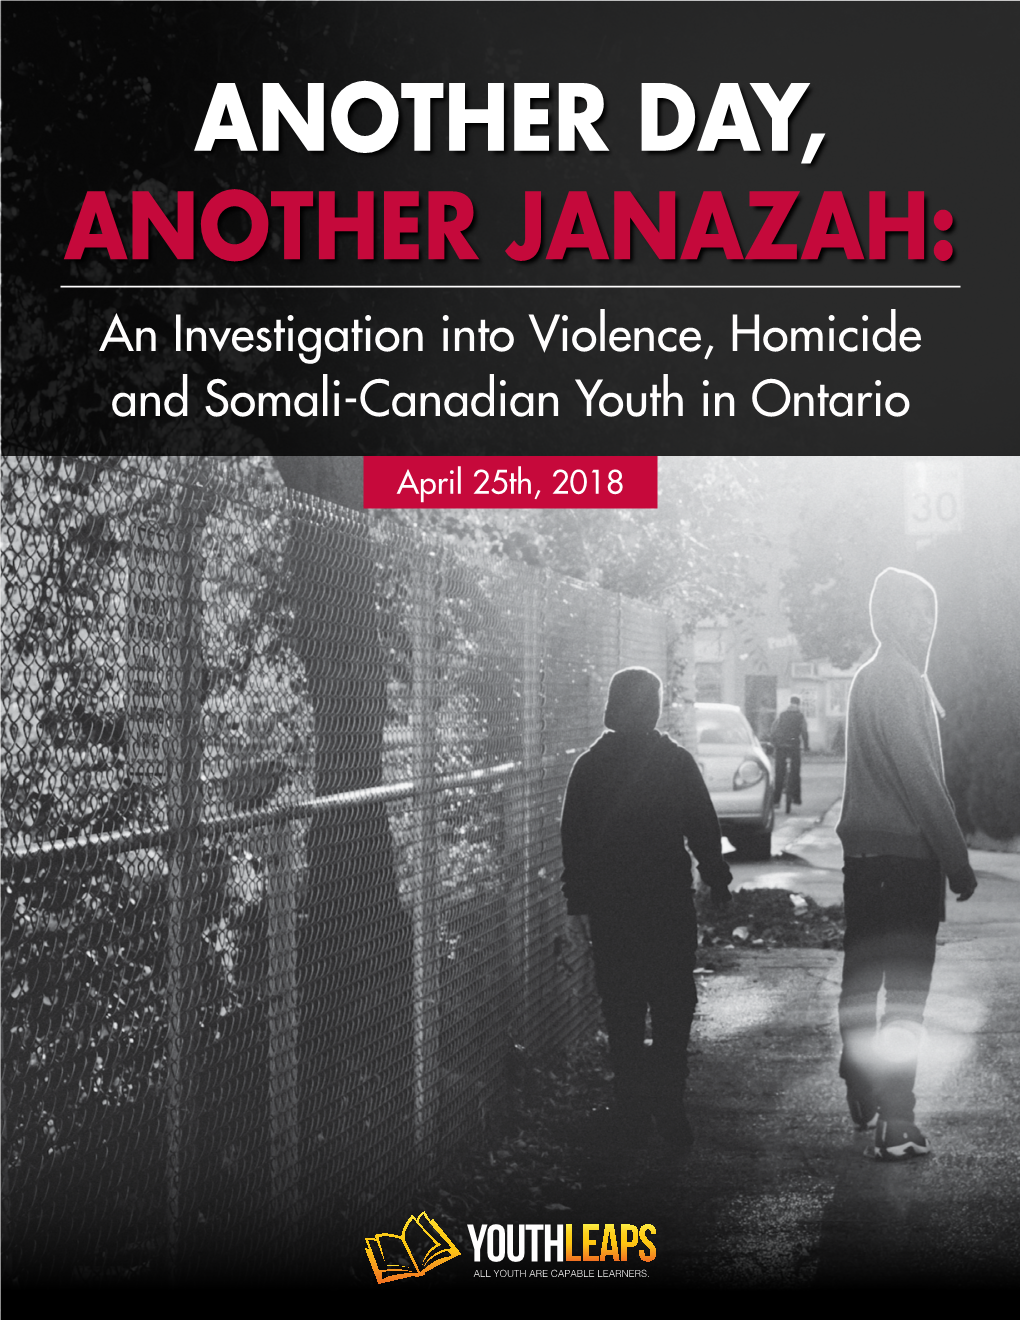 ANOTHER DAY, ANOTHER JANAZAH: an Investigation Into Violence, Homicide and Somali-Canadian Youth in Ontario